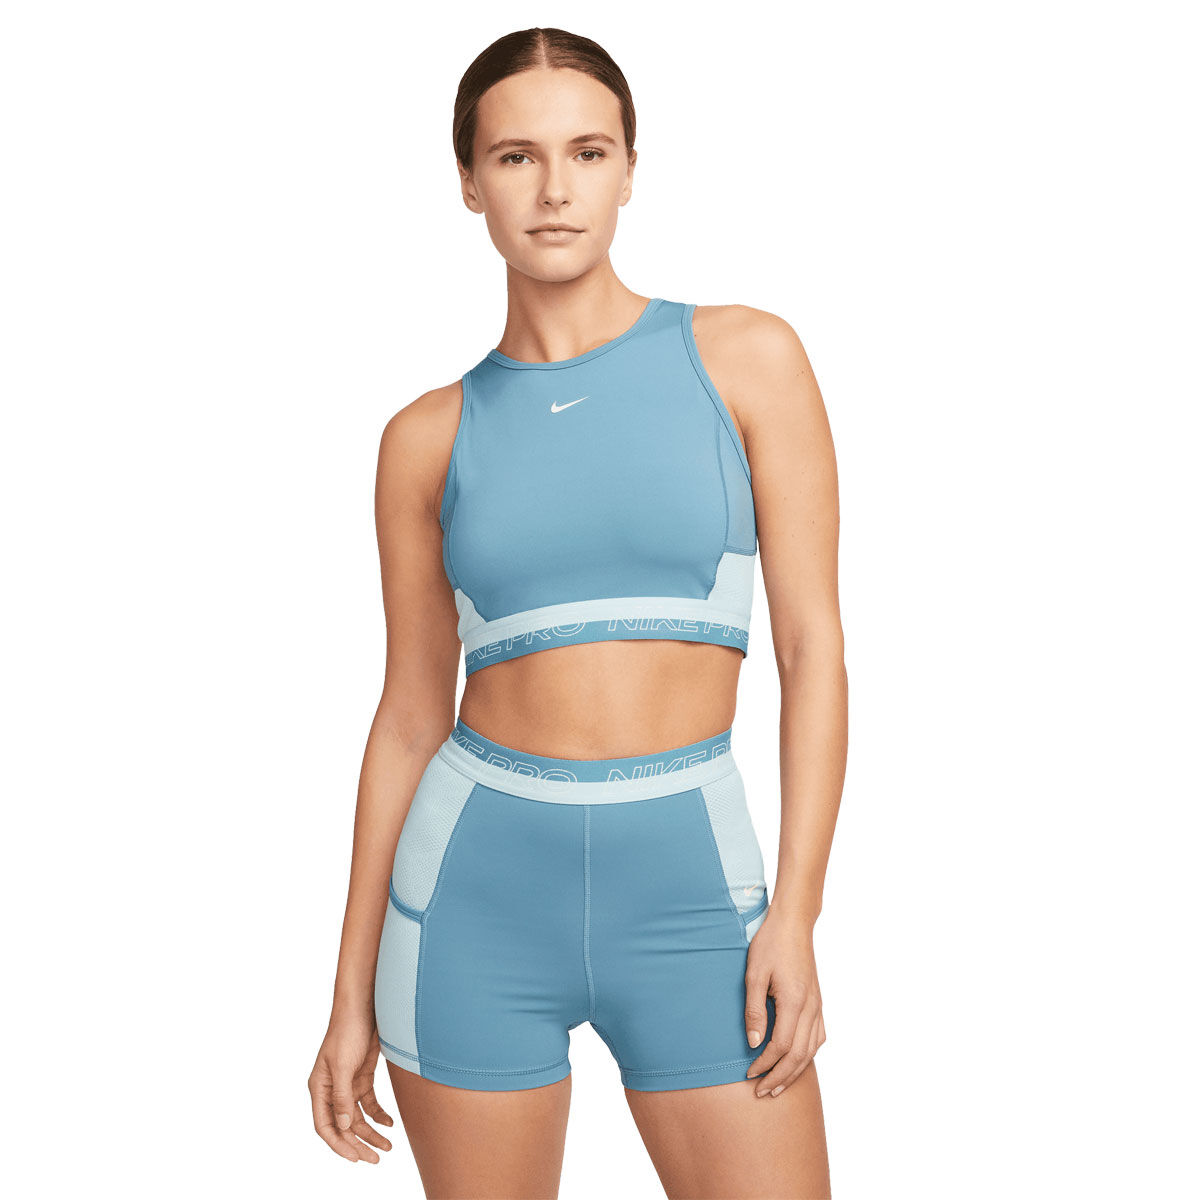 Nike Pro Training Crossover Crop Top In Blue